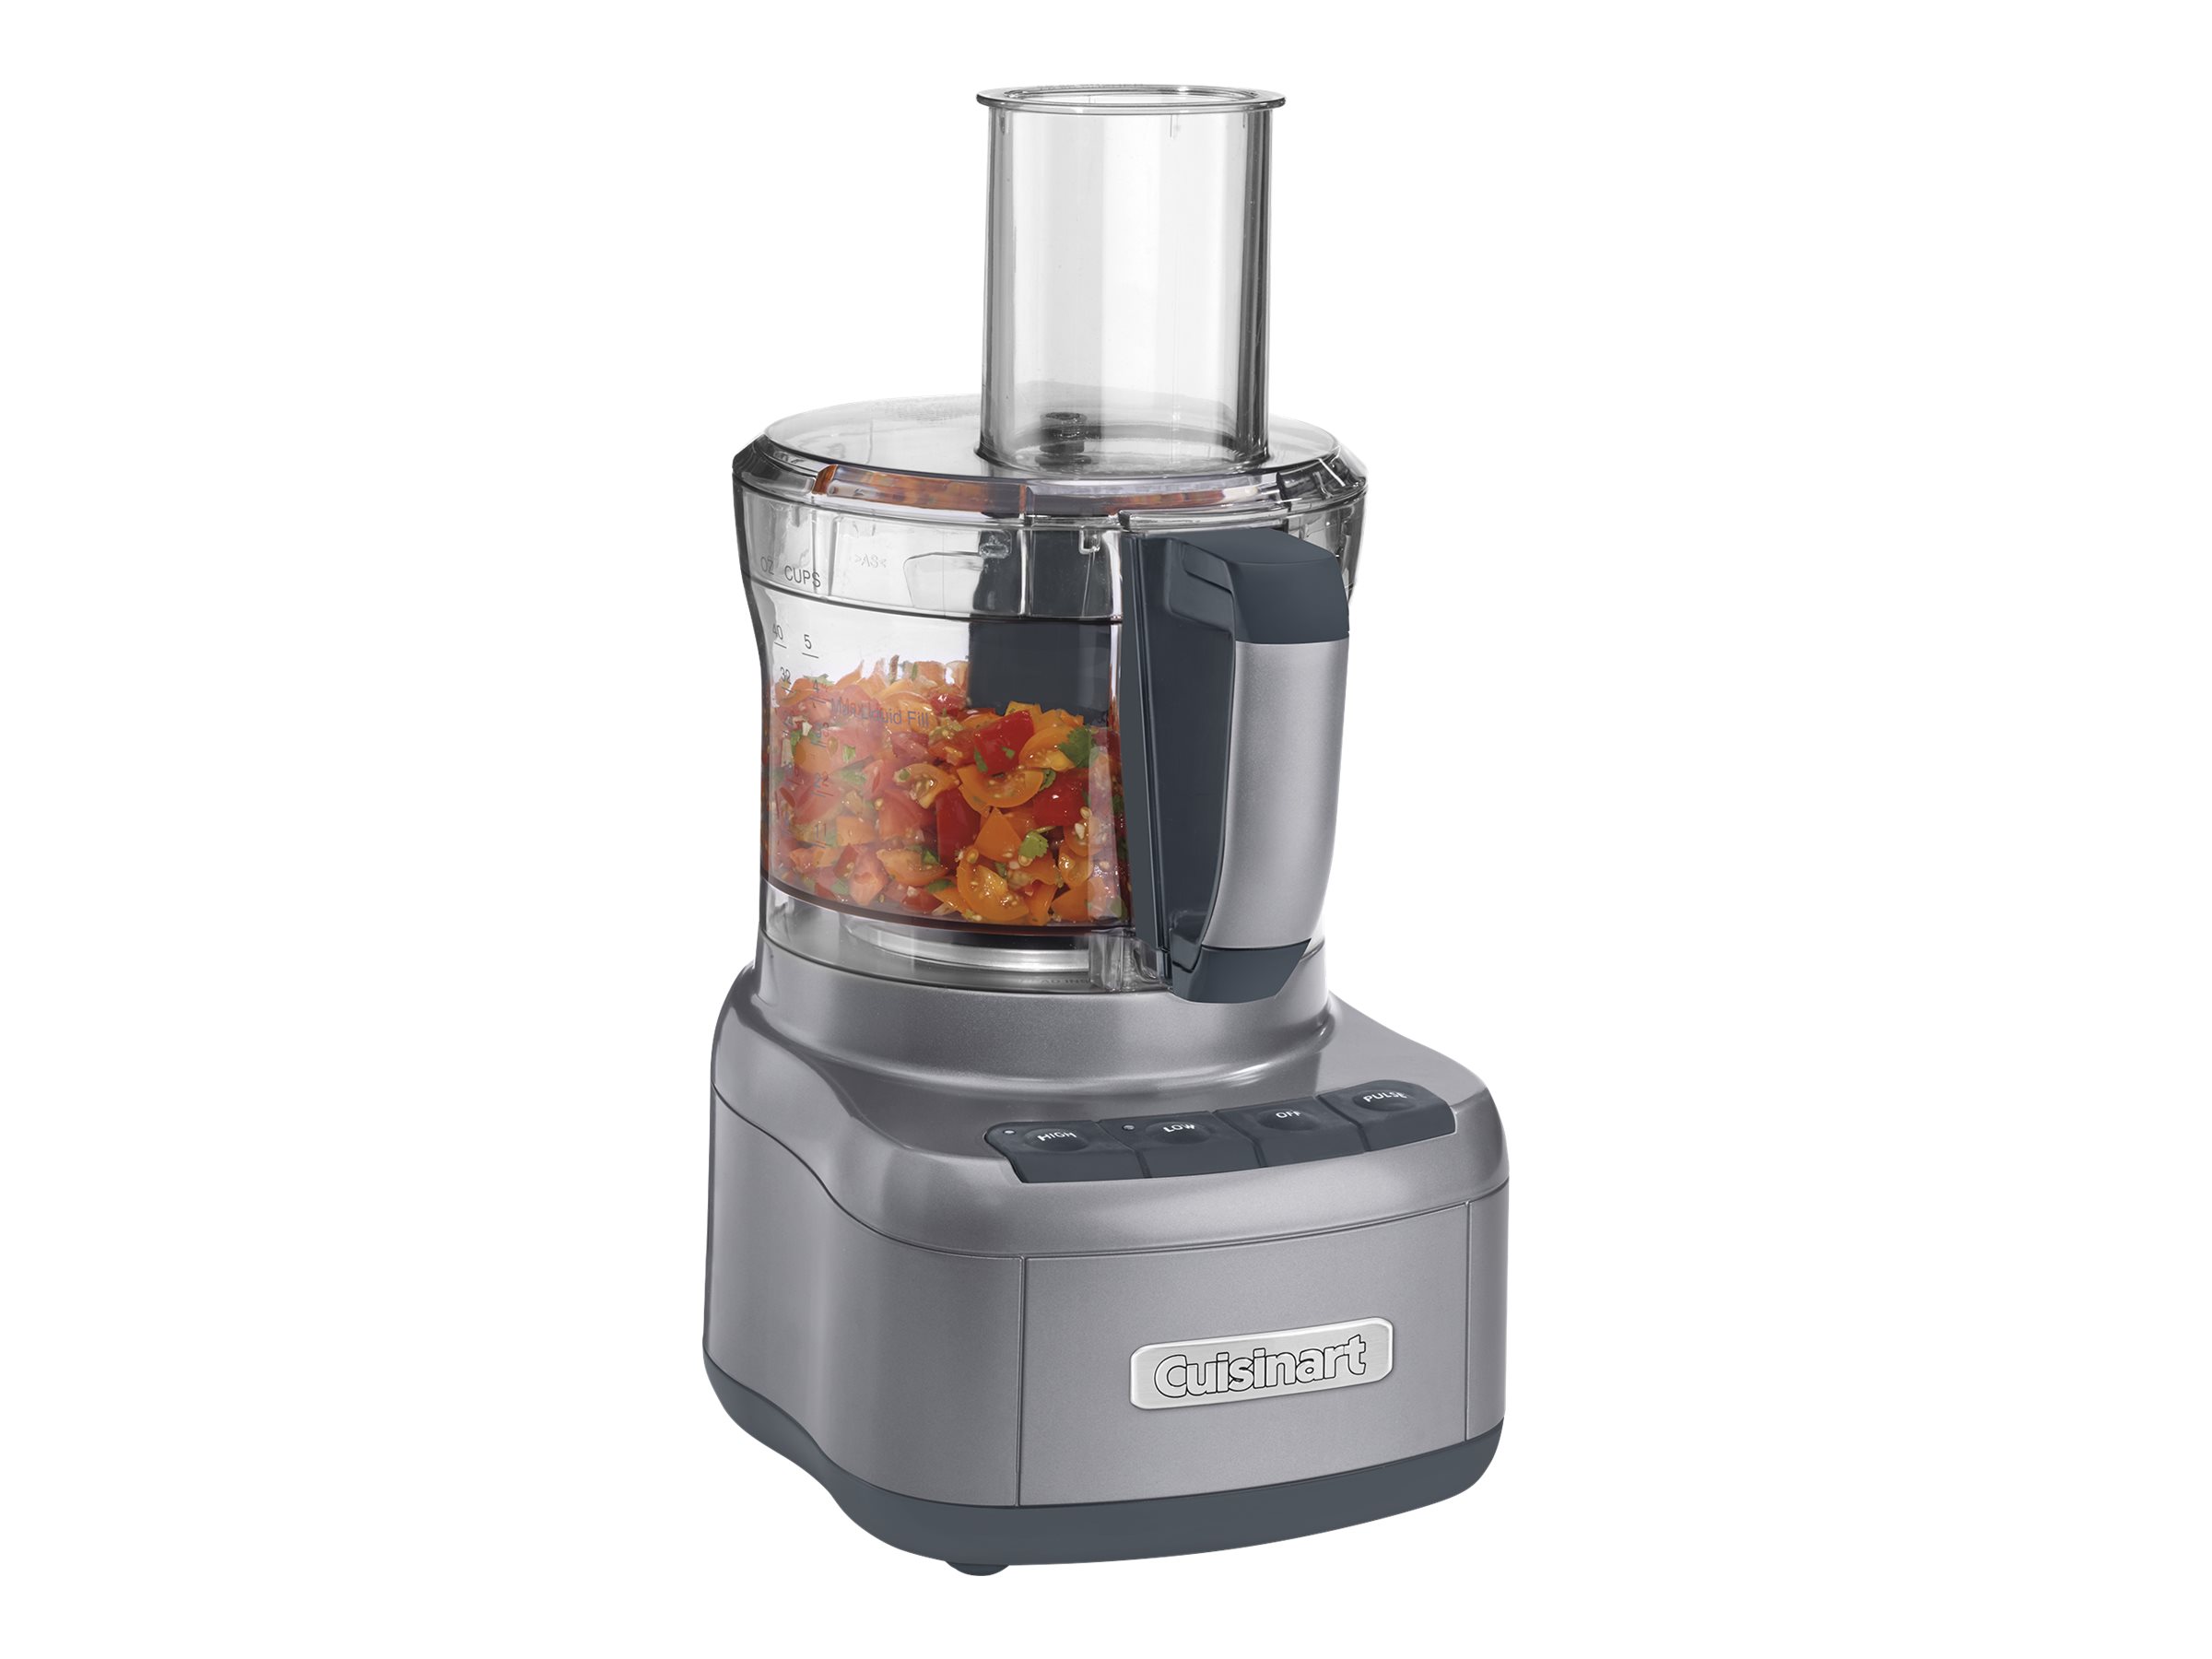 Cuisinart FP8GMP1 Elemental 8-Cup Food Processor - image 3 of 4